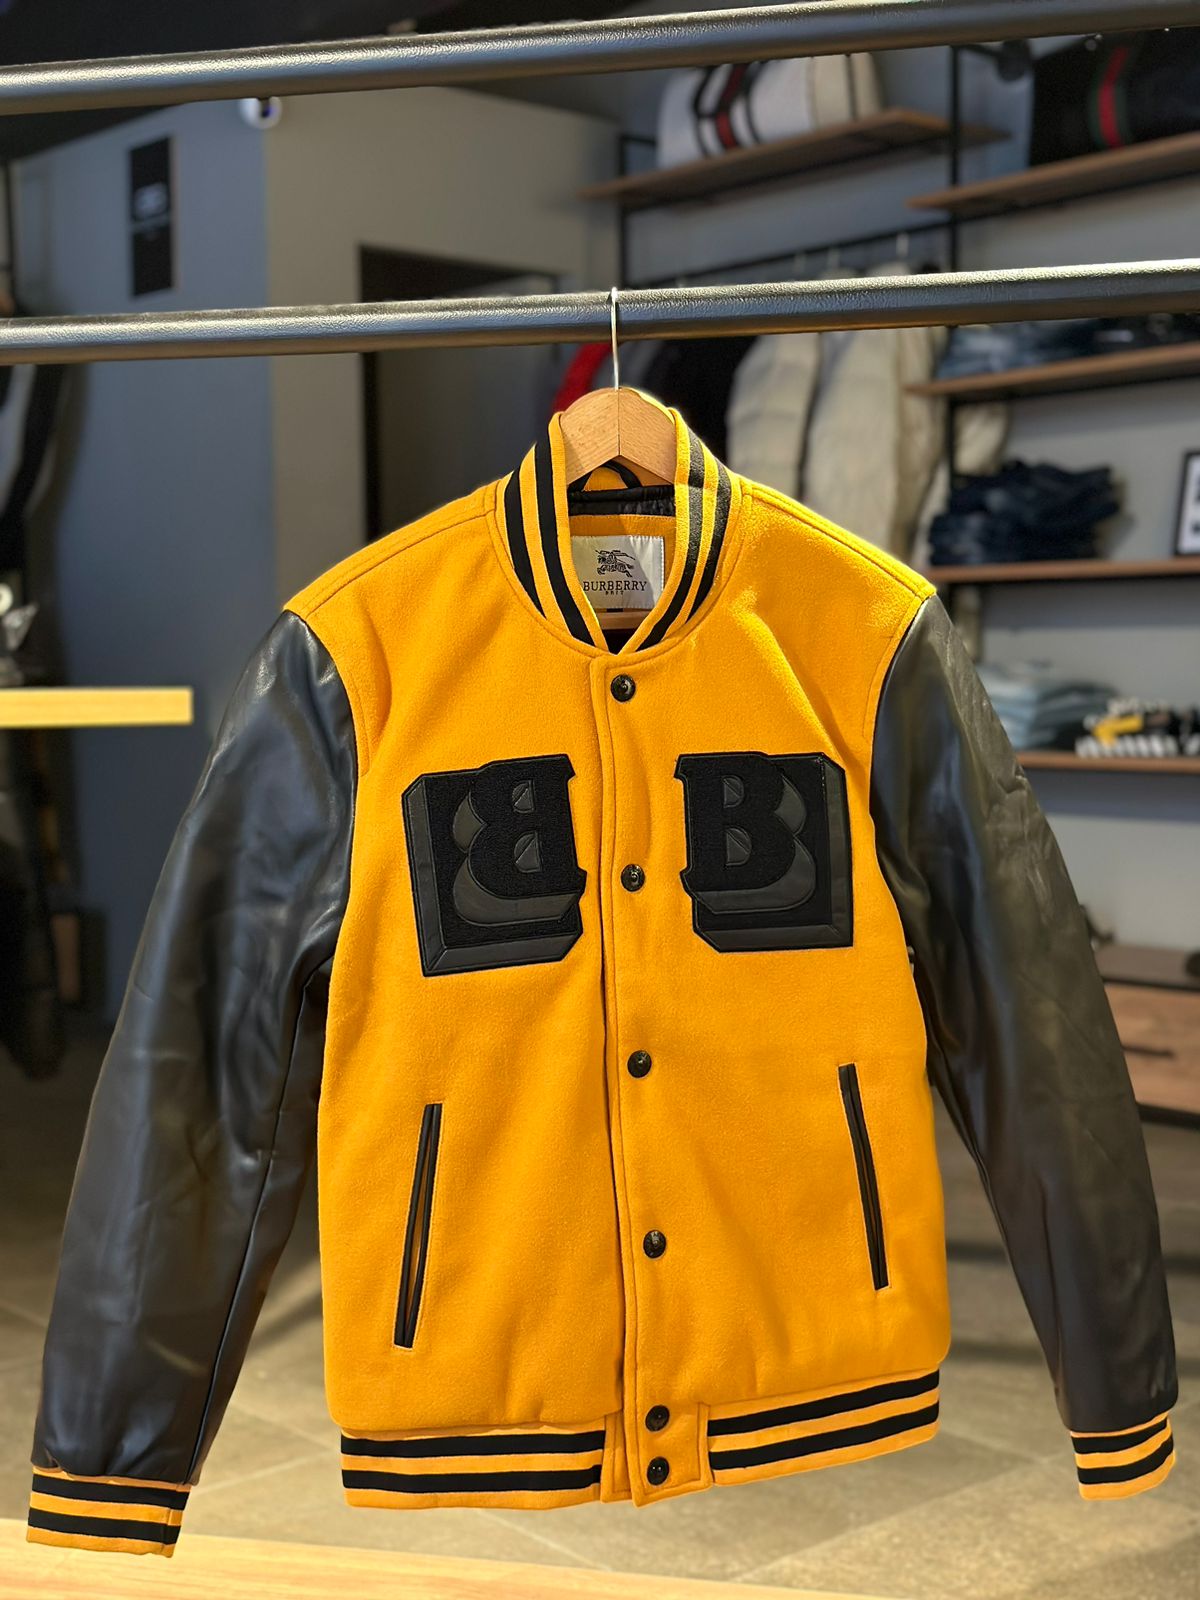 BURBERRY JACKET "Leather SLEEVES"